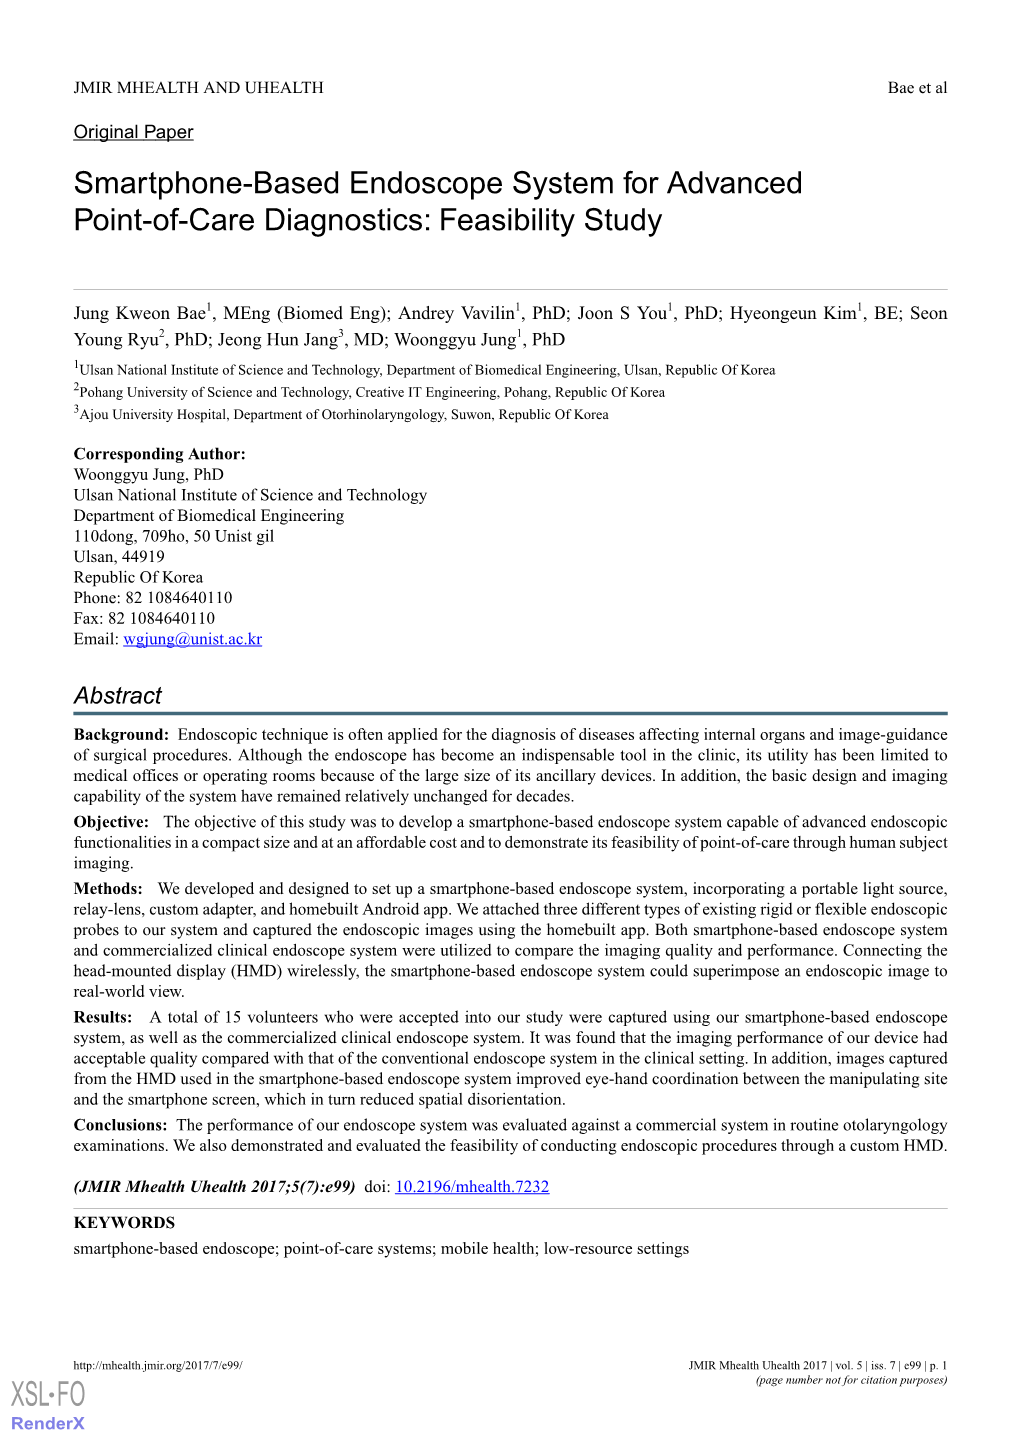 Smartphone-Based Endoscope System for Advanced Point-Of-Care Diagnostics: Feasibility Study